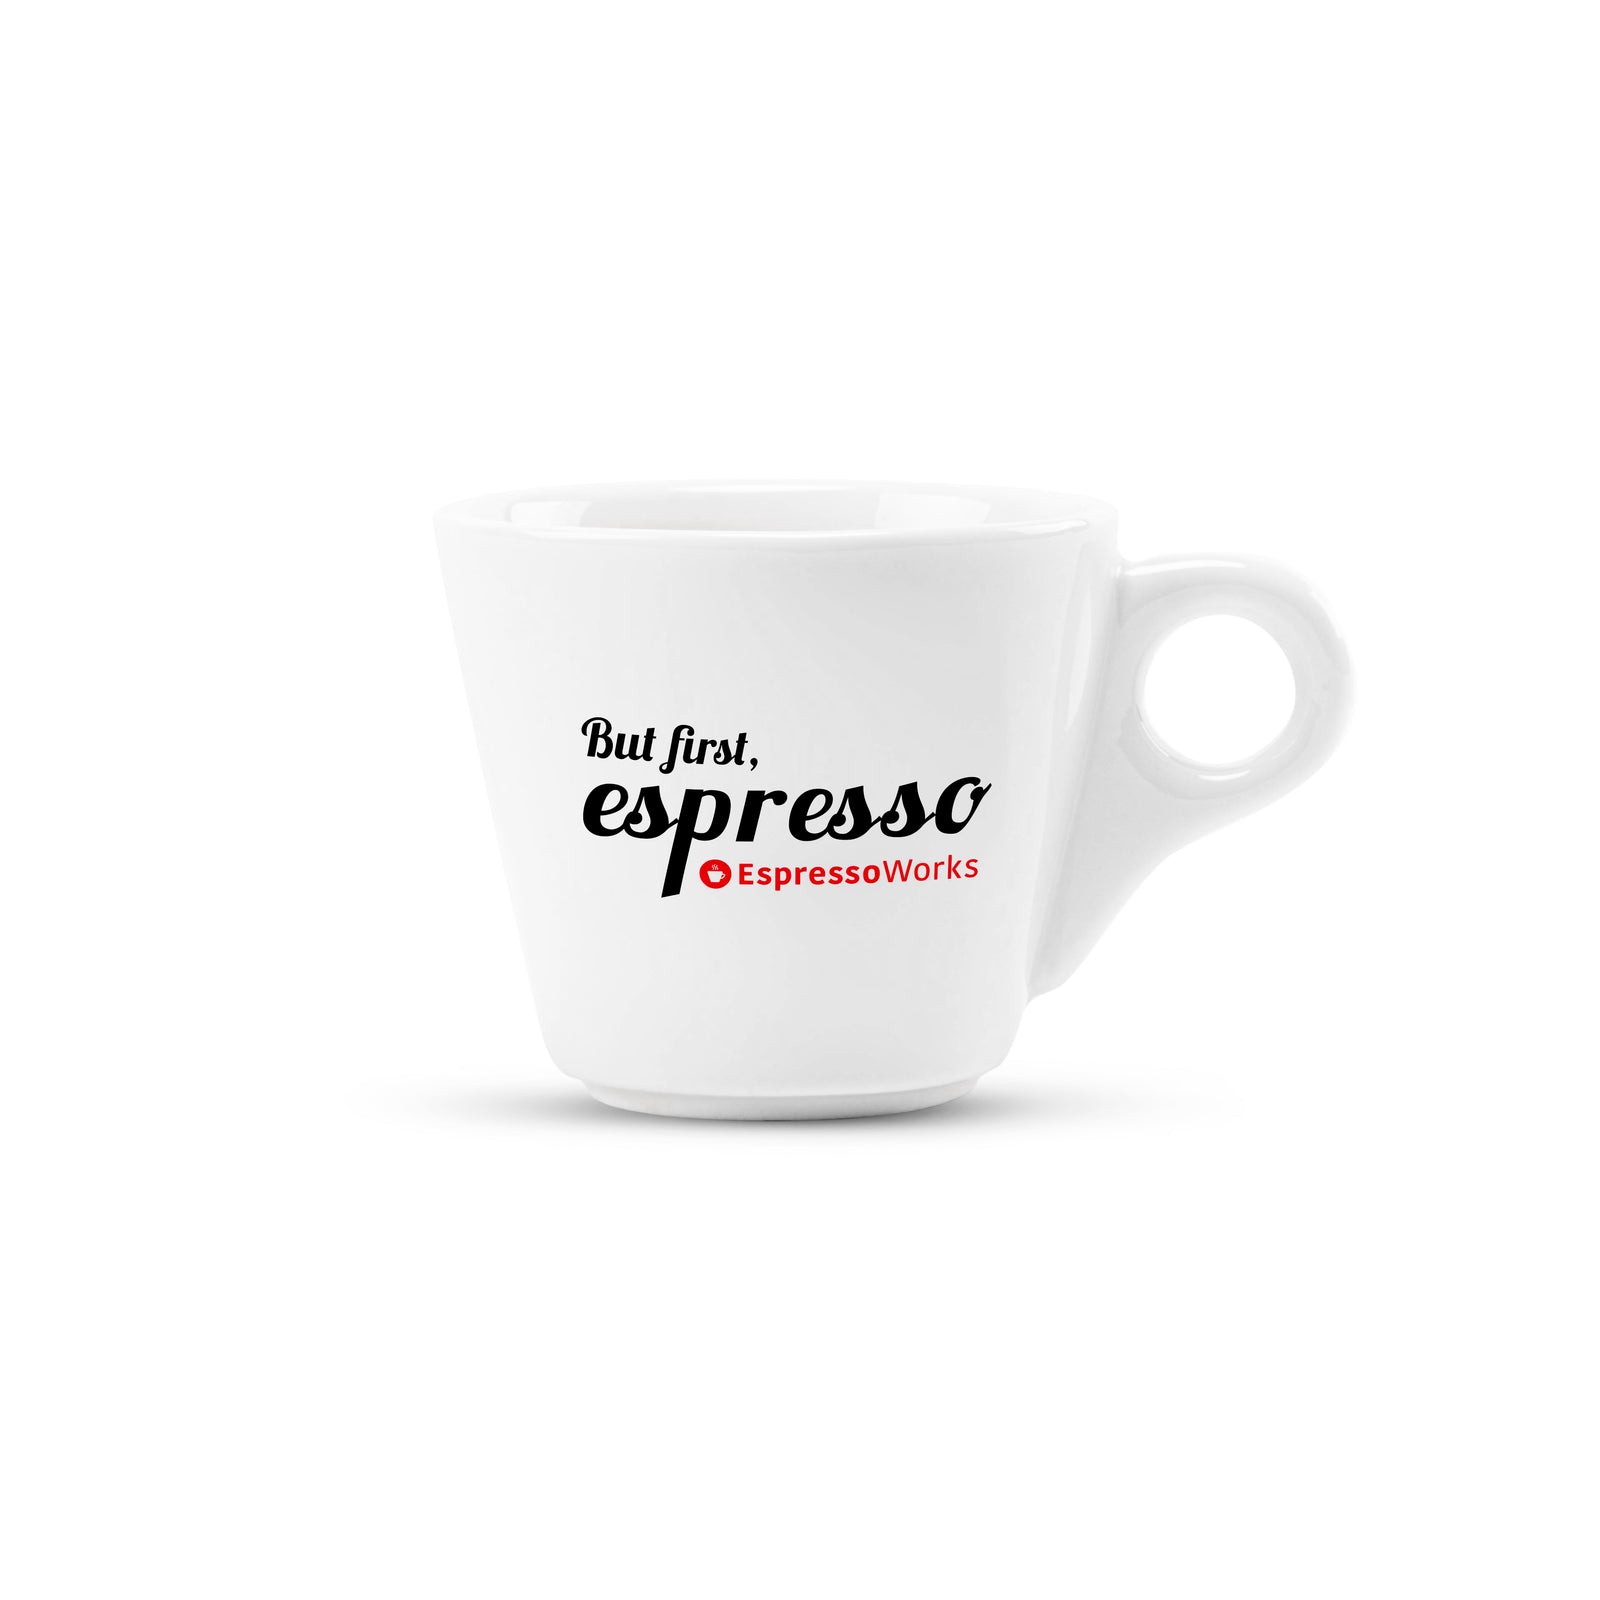 Why do most espresso mugs have handles that are too small to be functional?  Either have a working handle or don't : r/mildlyinfuriating